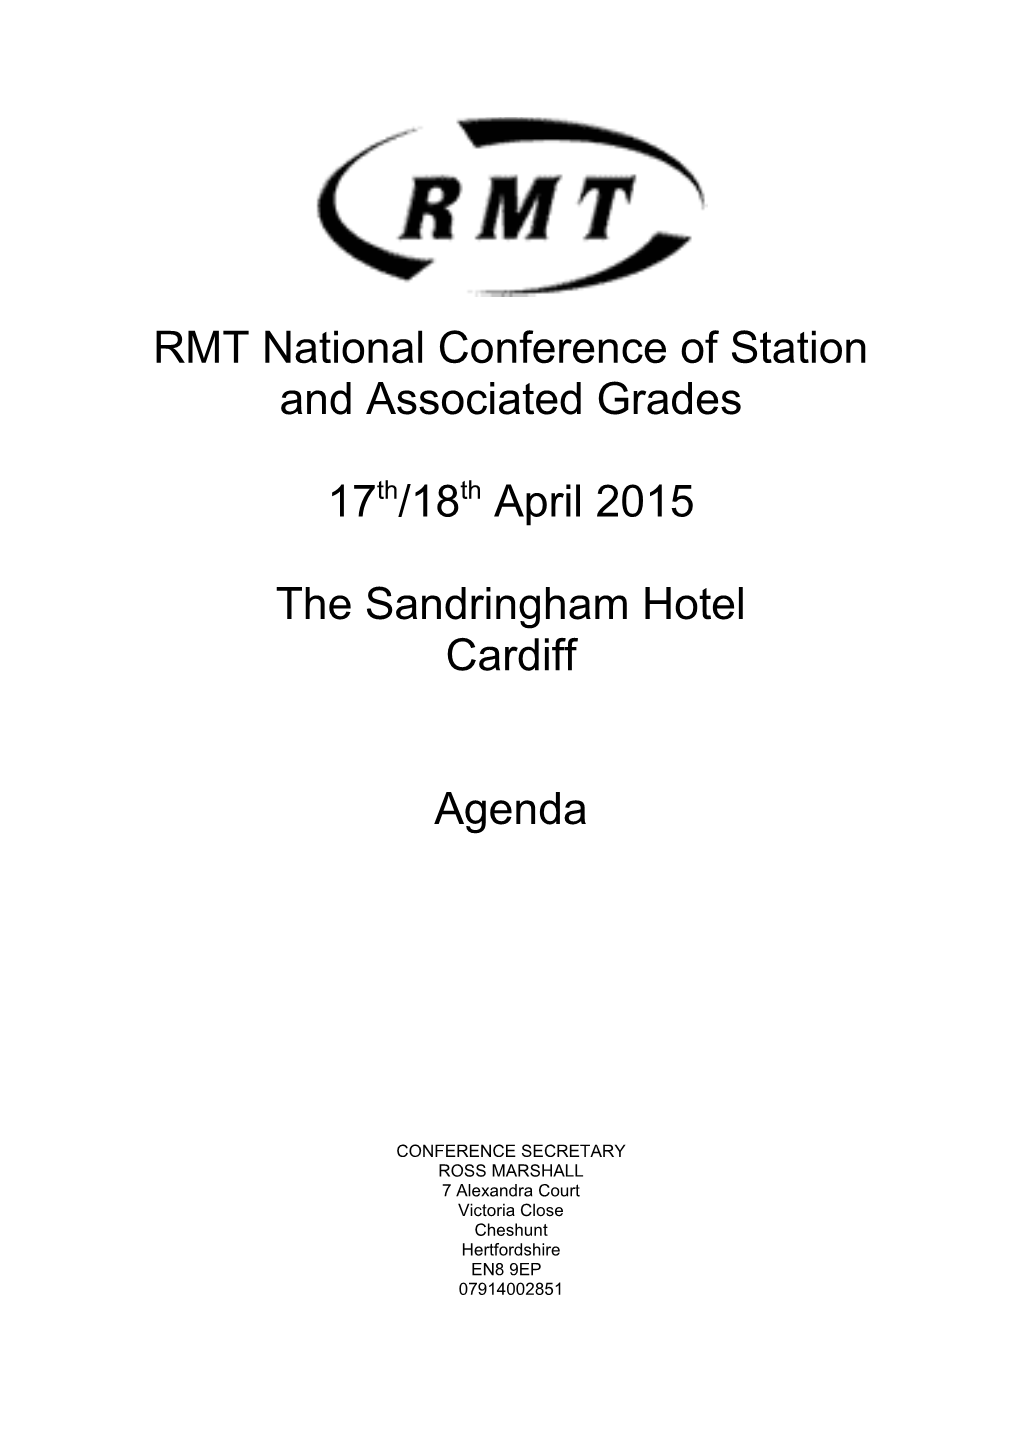 RMT National Conference of Station and Associated Grades